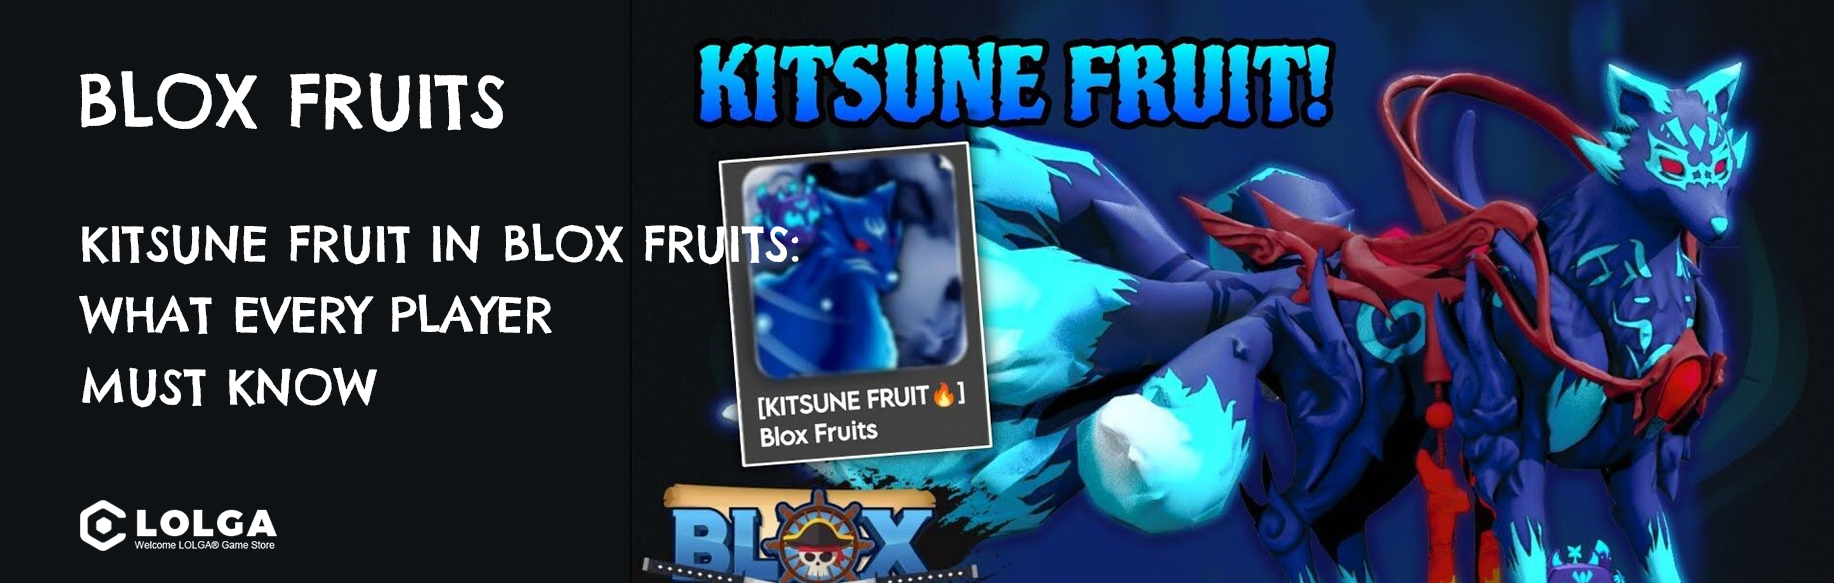  Kitsune Fruit in Blox Fruits: What Every Player Must Know